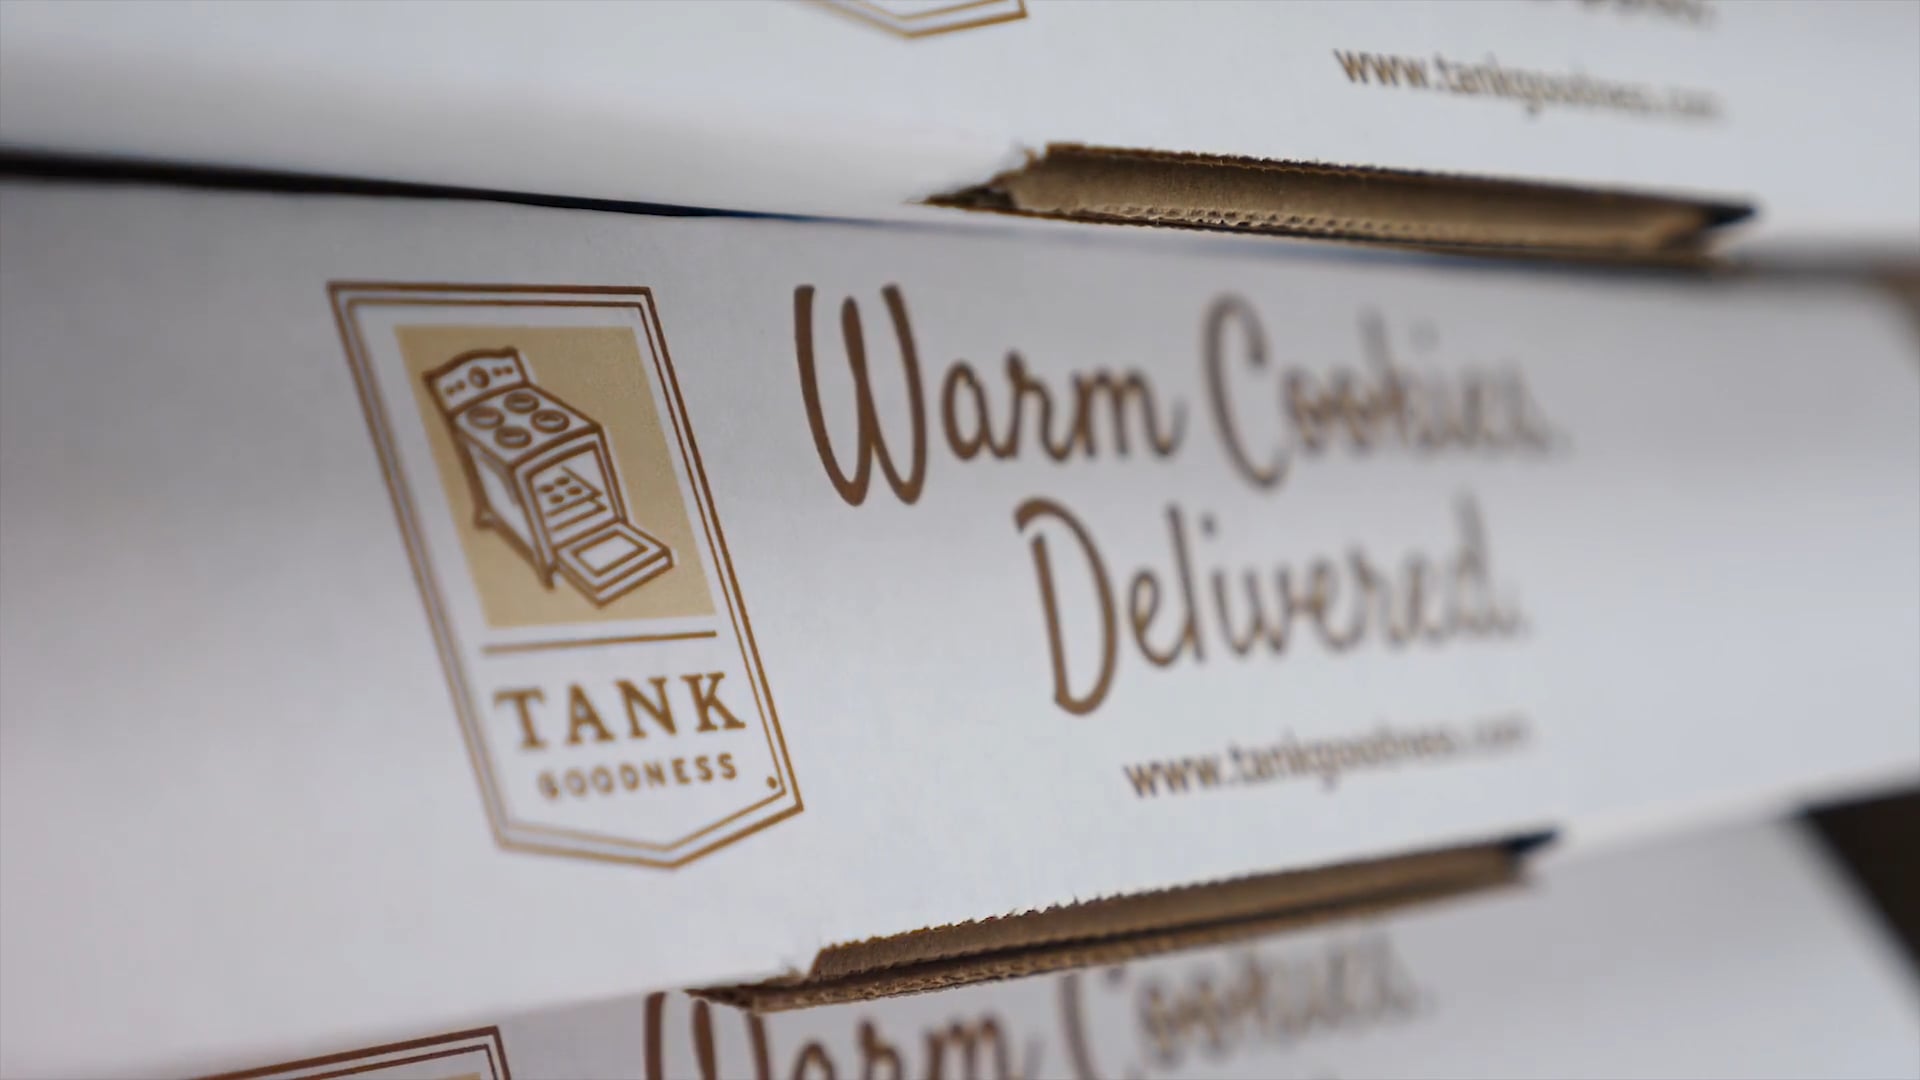 Tank Goodness Warm Cookie Delivery